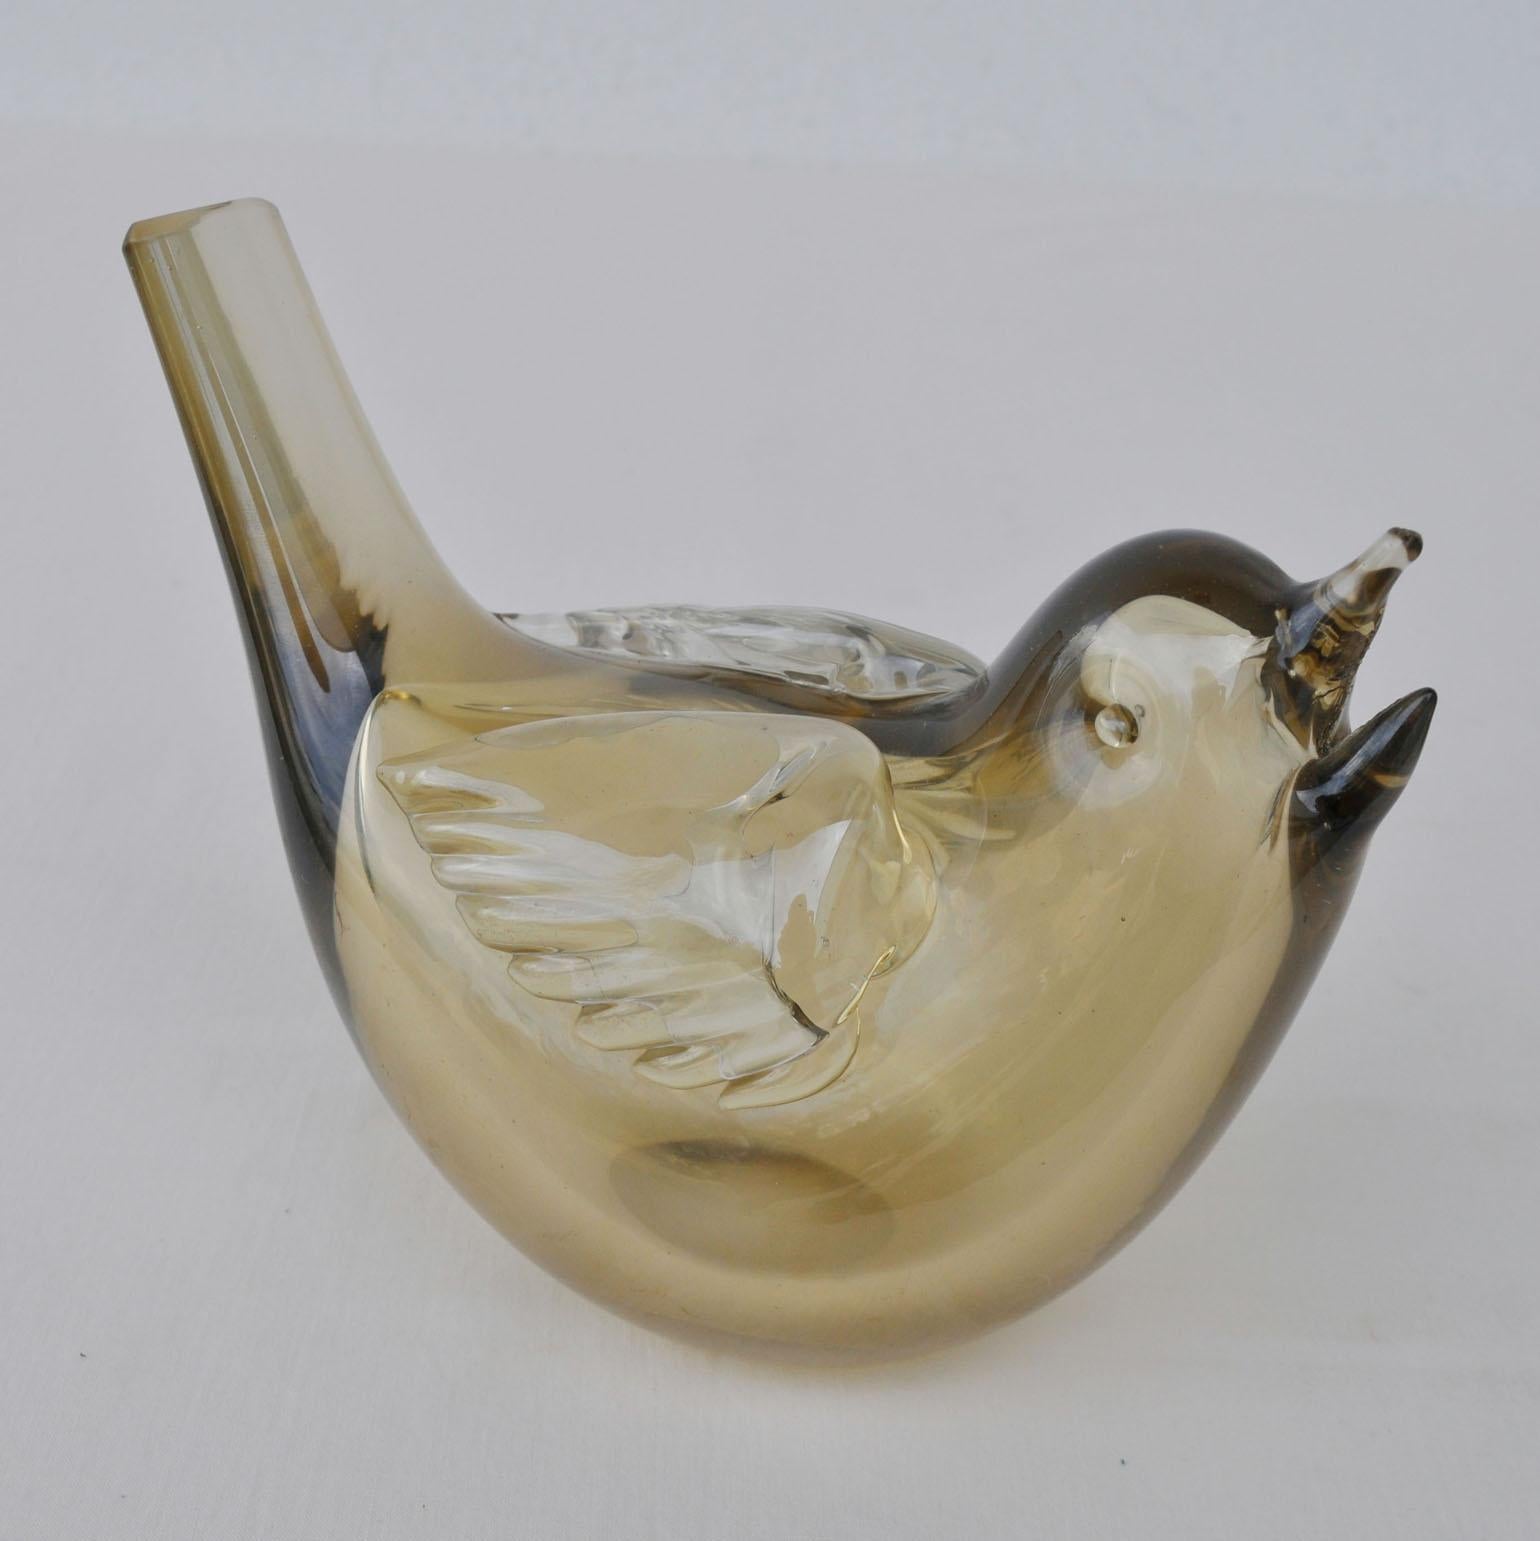 Pair of Birds Sculpture Hand Blown Glass by Tyra Lundgren for Paolo Venini  1940 1